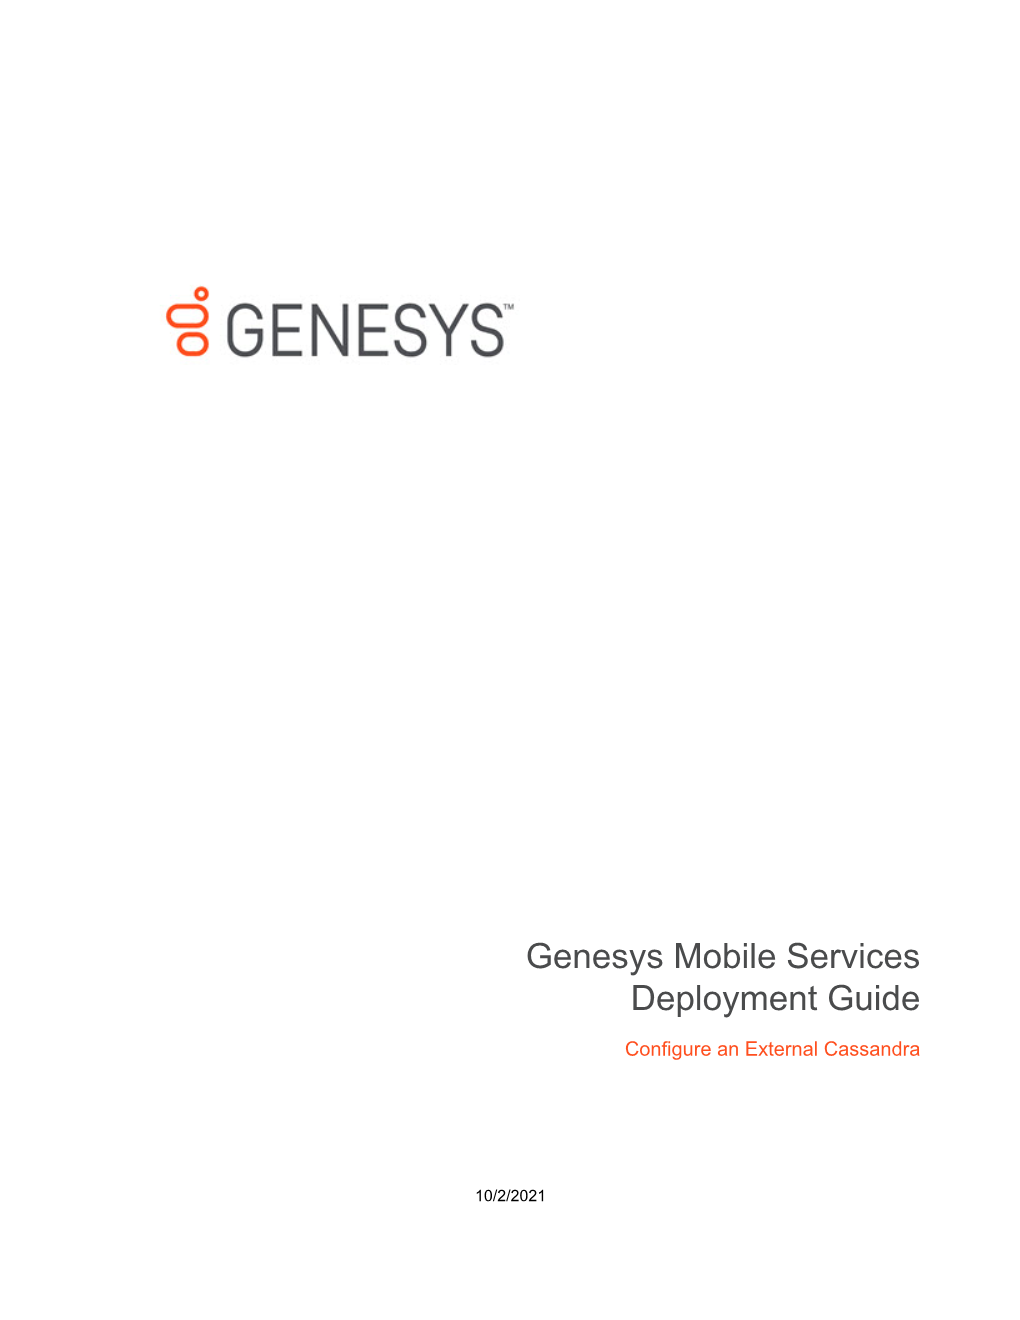 Genesys Mobile Services Deployment Guide